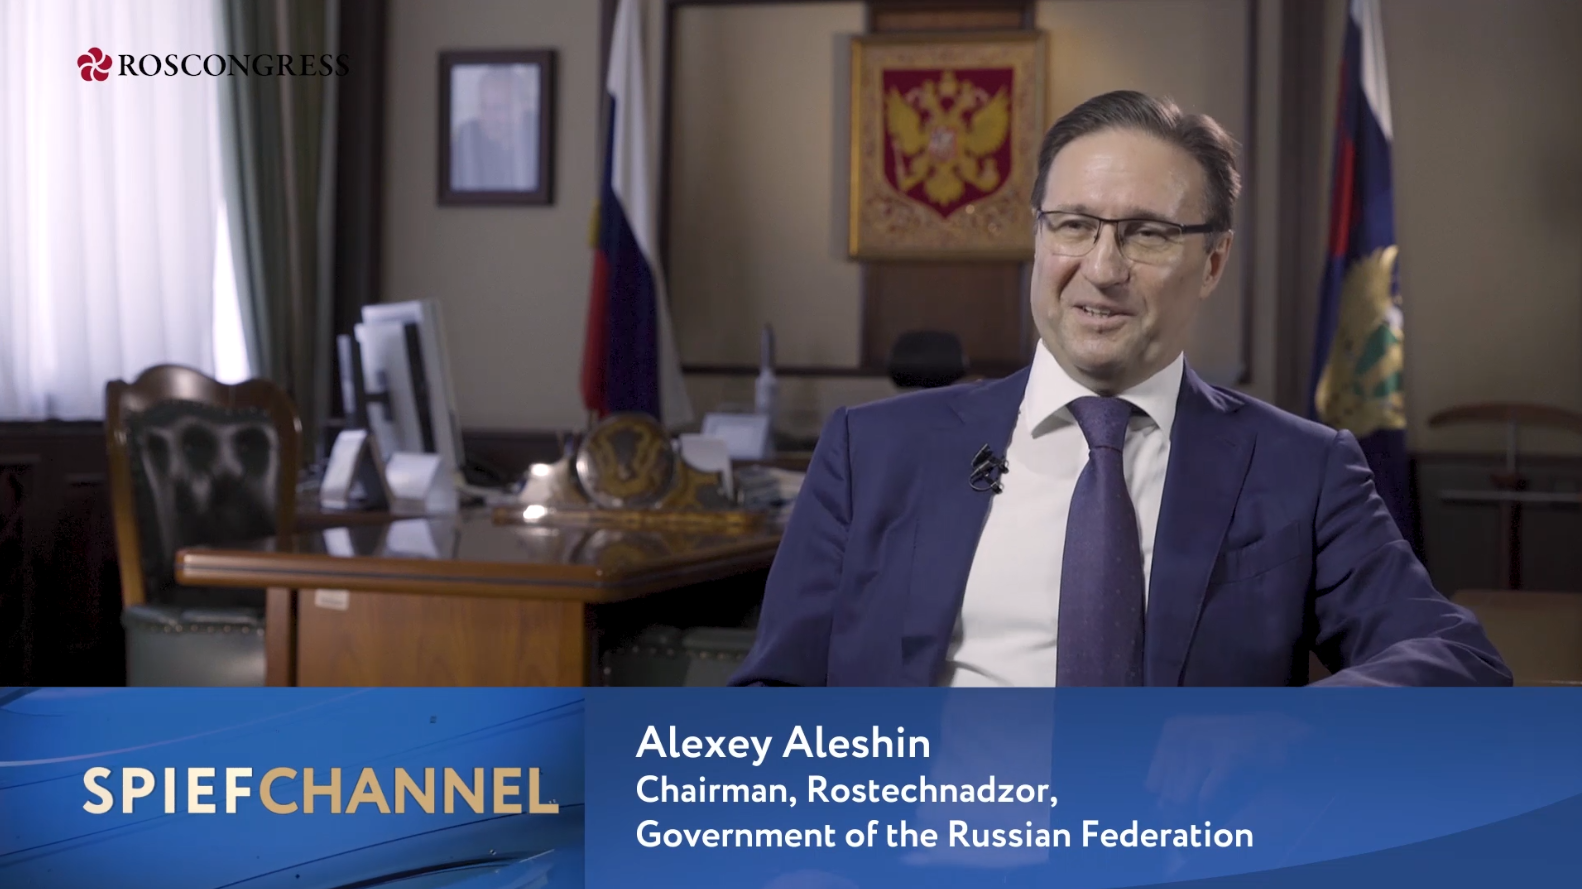 Alexey Aleshin, Chairman, Rostechnadzor, Government of the Russian Federation